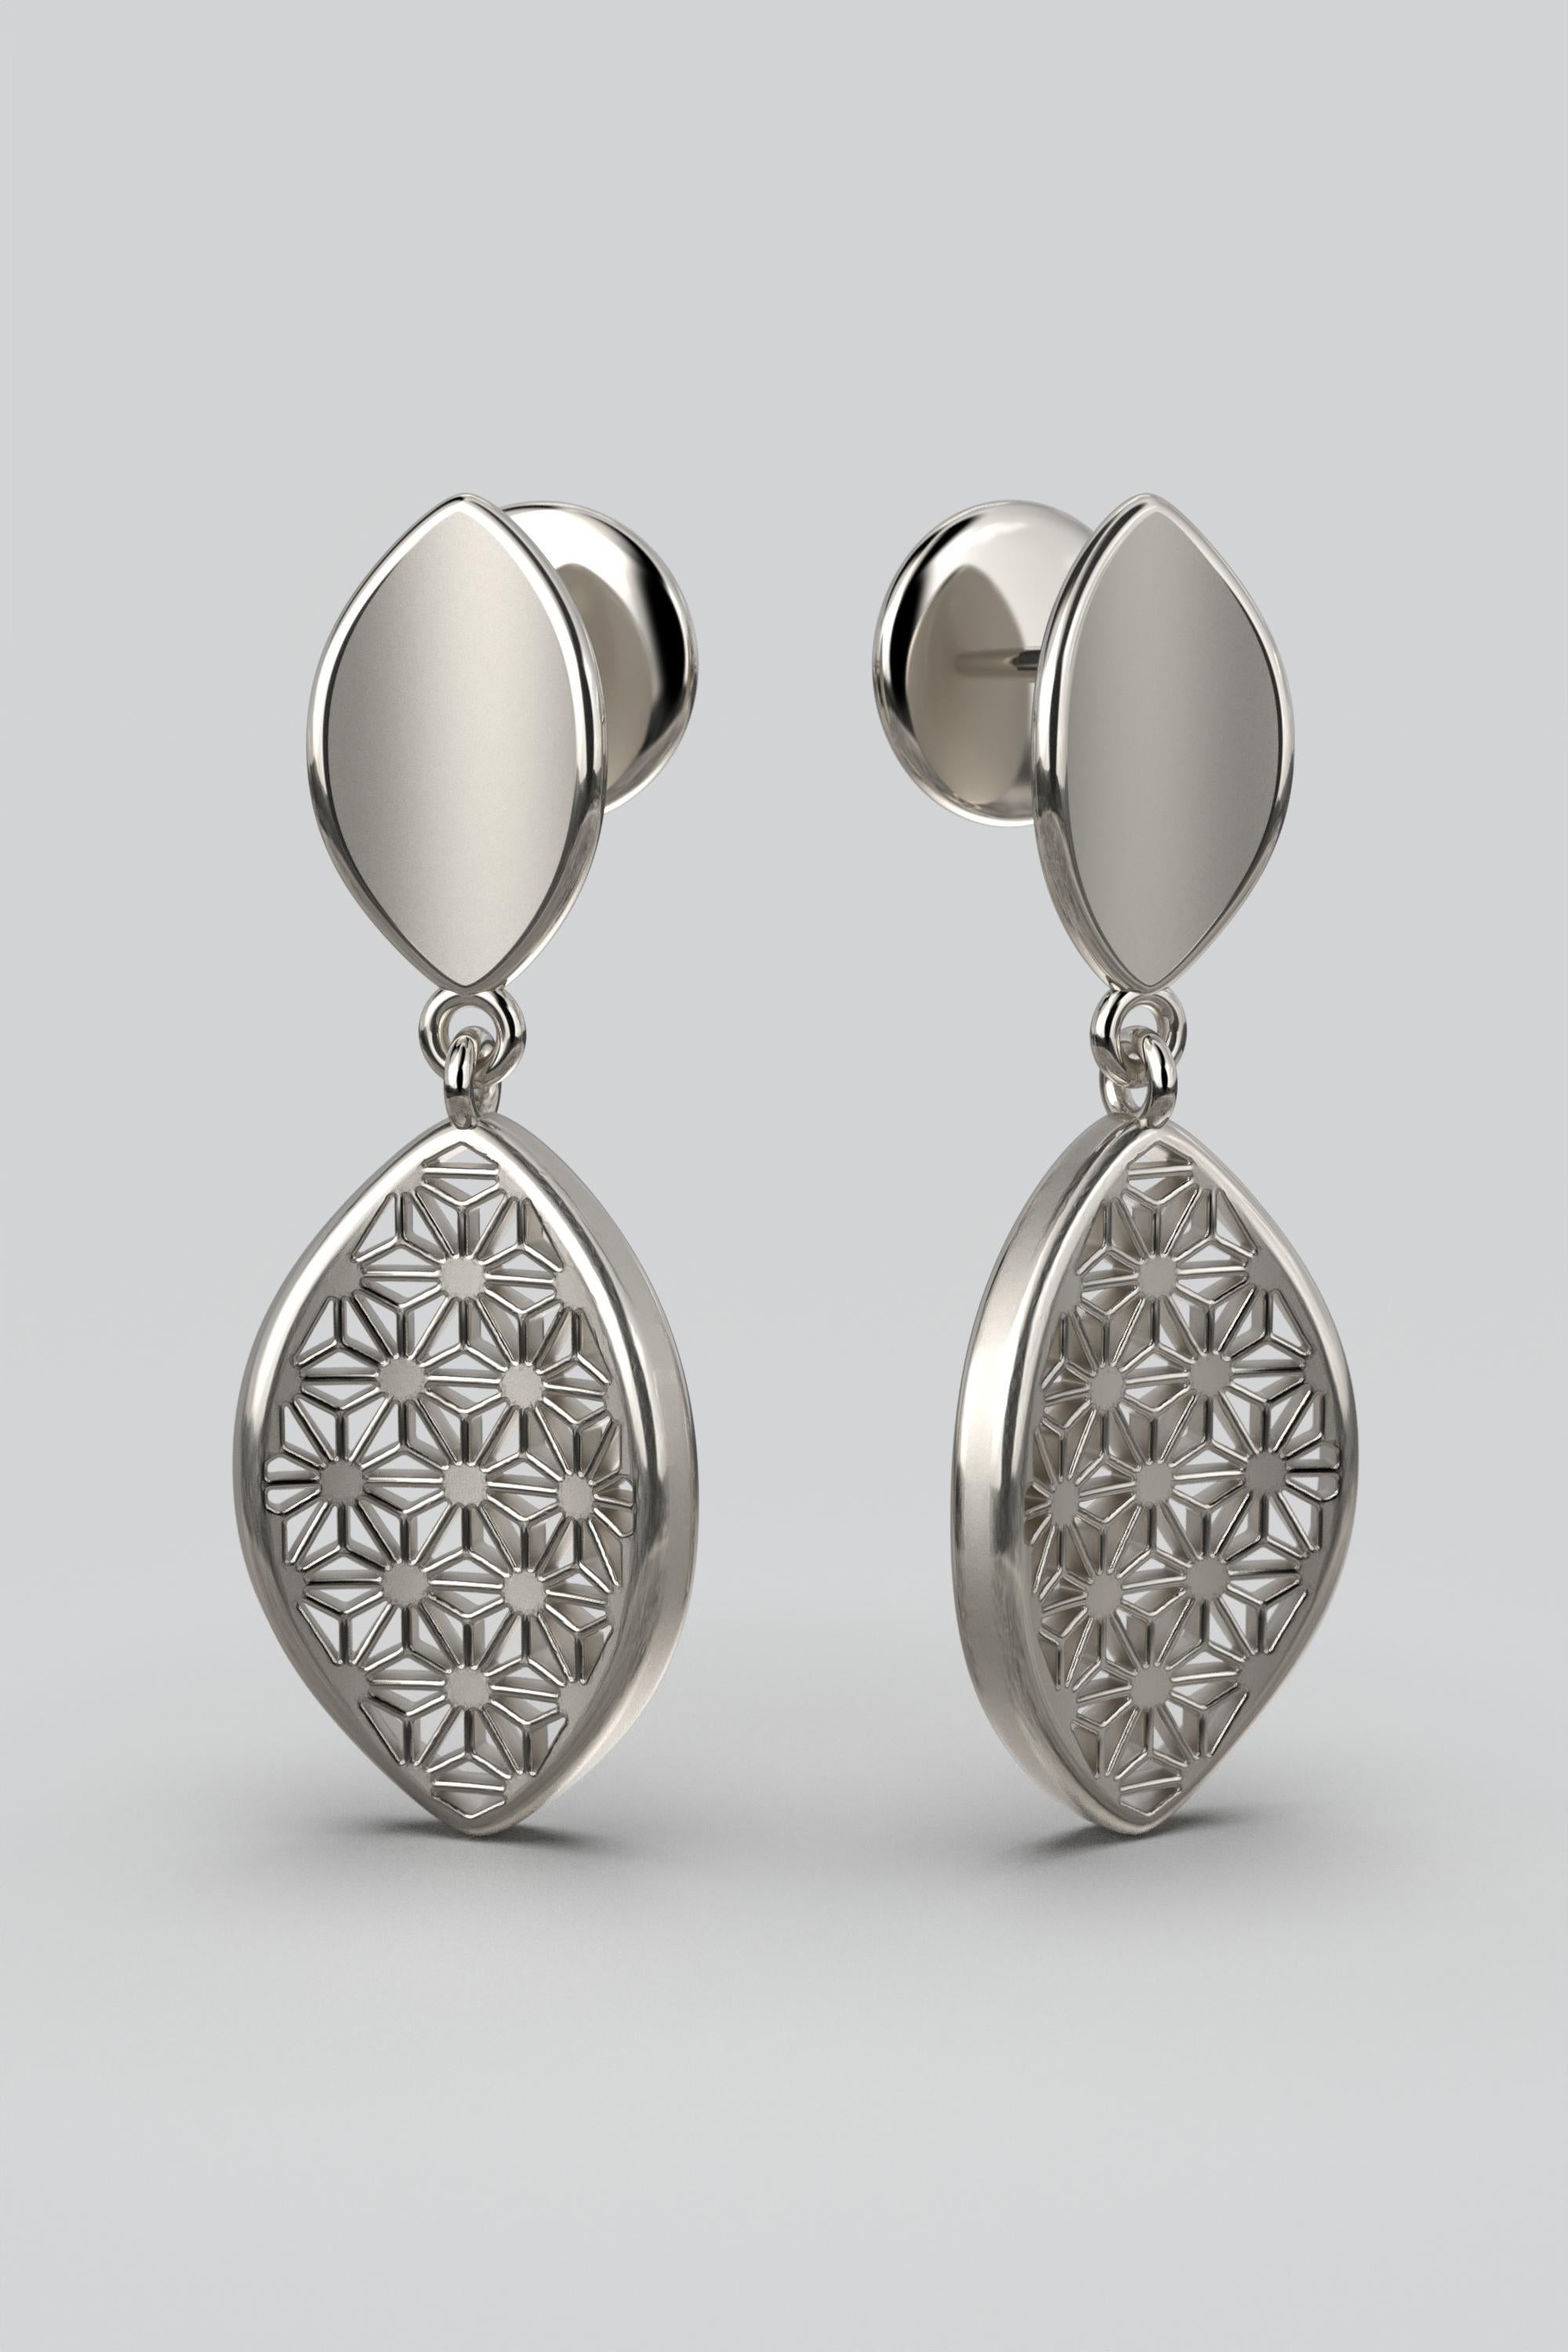 Japanese Sashiko Pattern Earrings Made in Italy in 14k Gold  Oltremare Gioielli For Sale 3